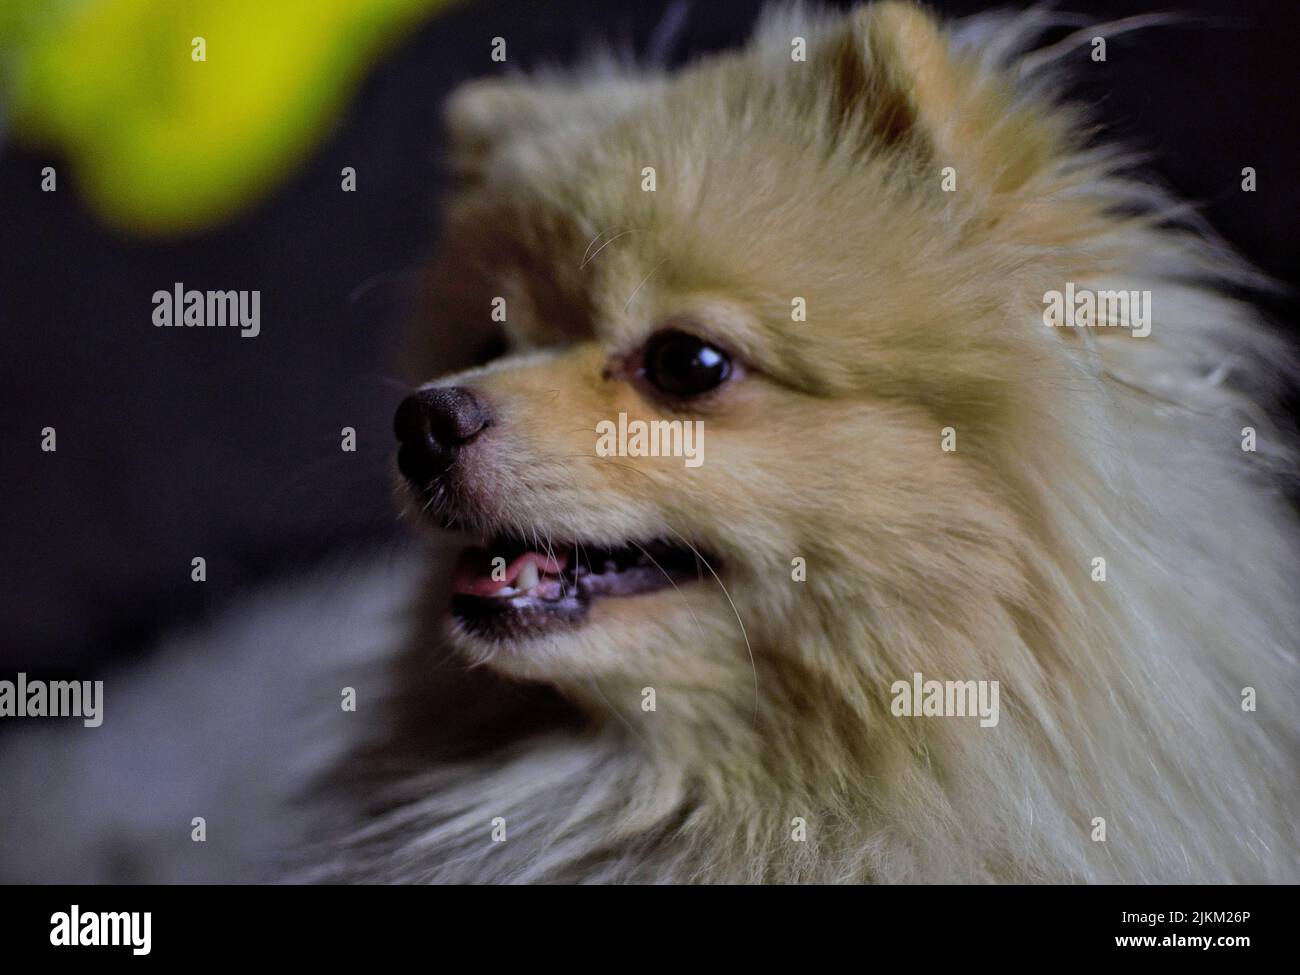 A cute smiling pomeranian on a blurred background Stock Photo